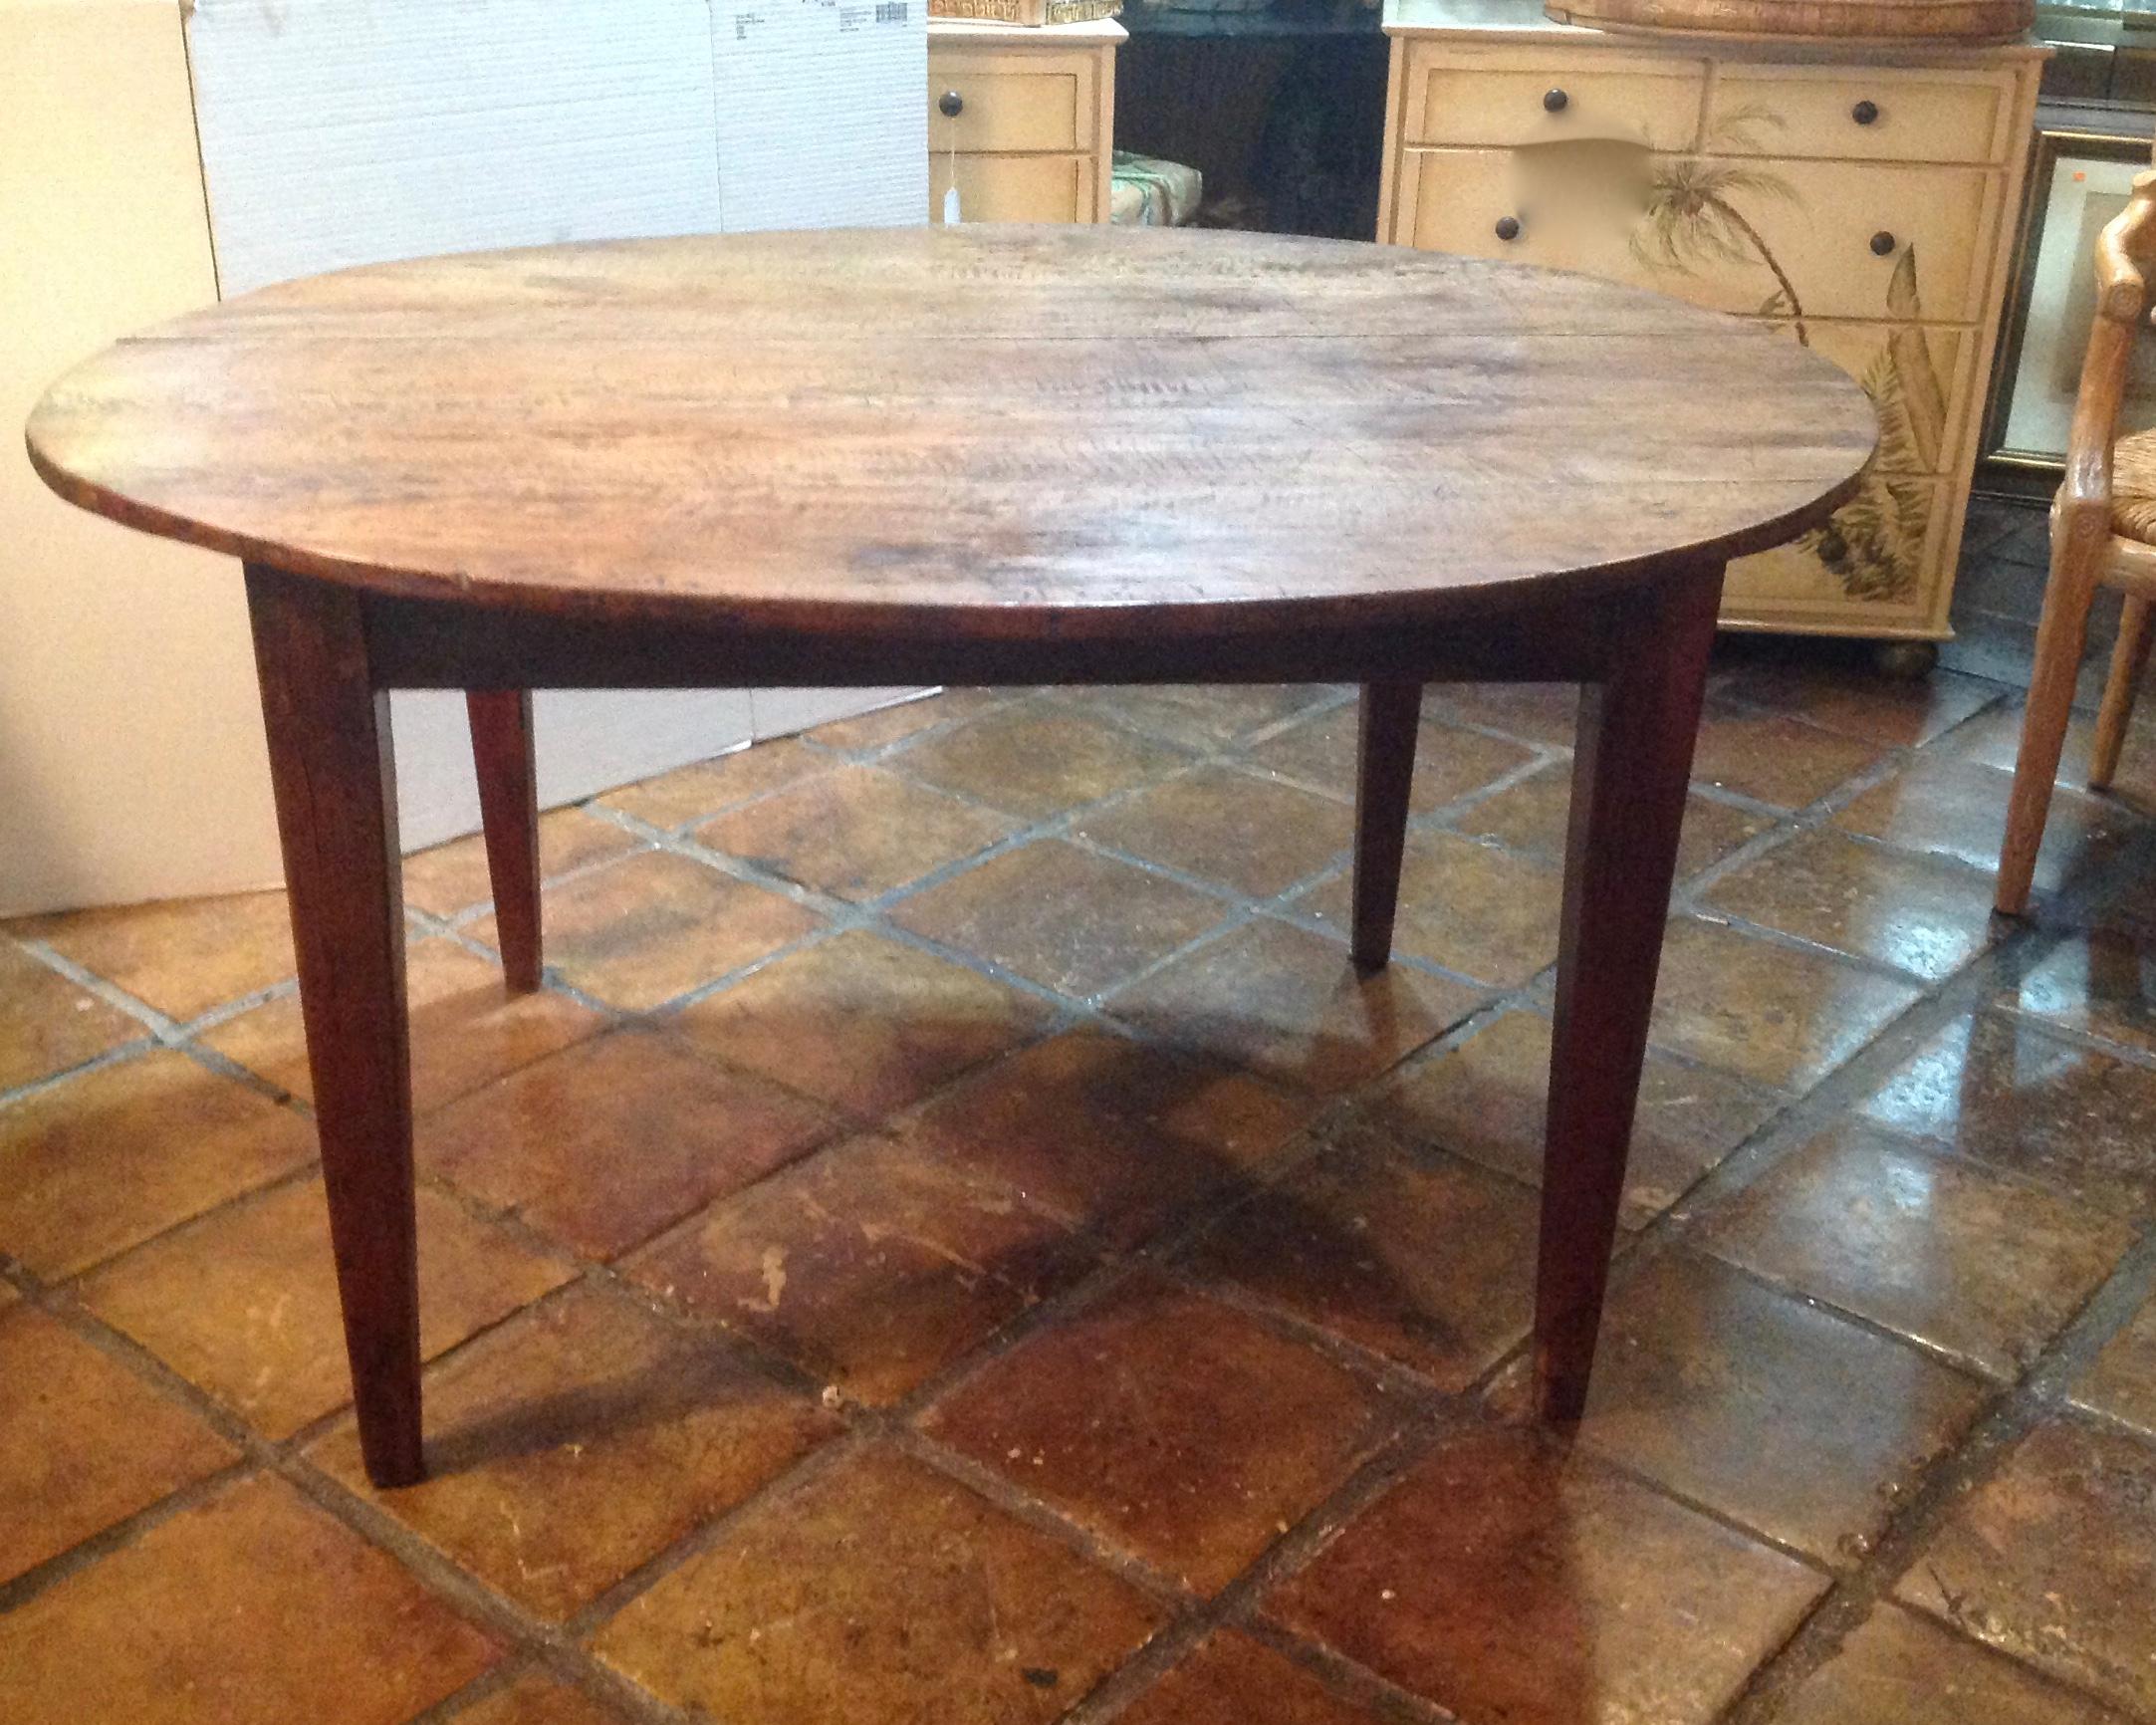 Great size and scale, with a mellow patina. The table is fashioned from walnut 
with a desirable oval form and tapered legs.